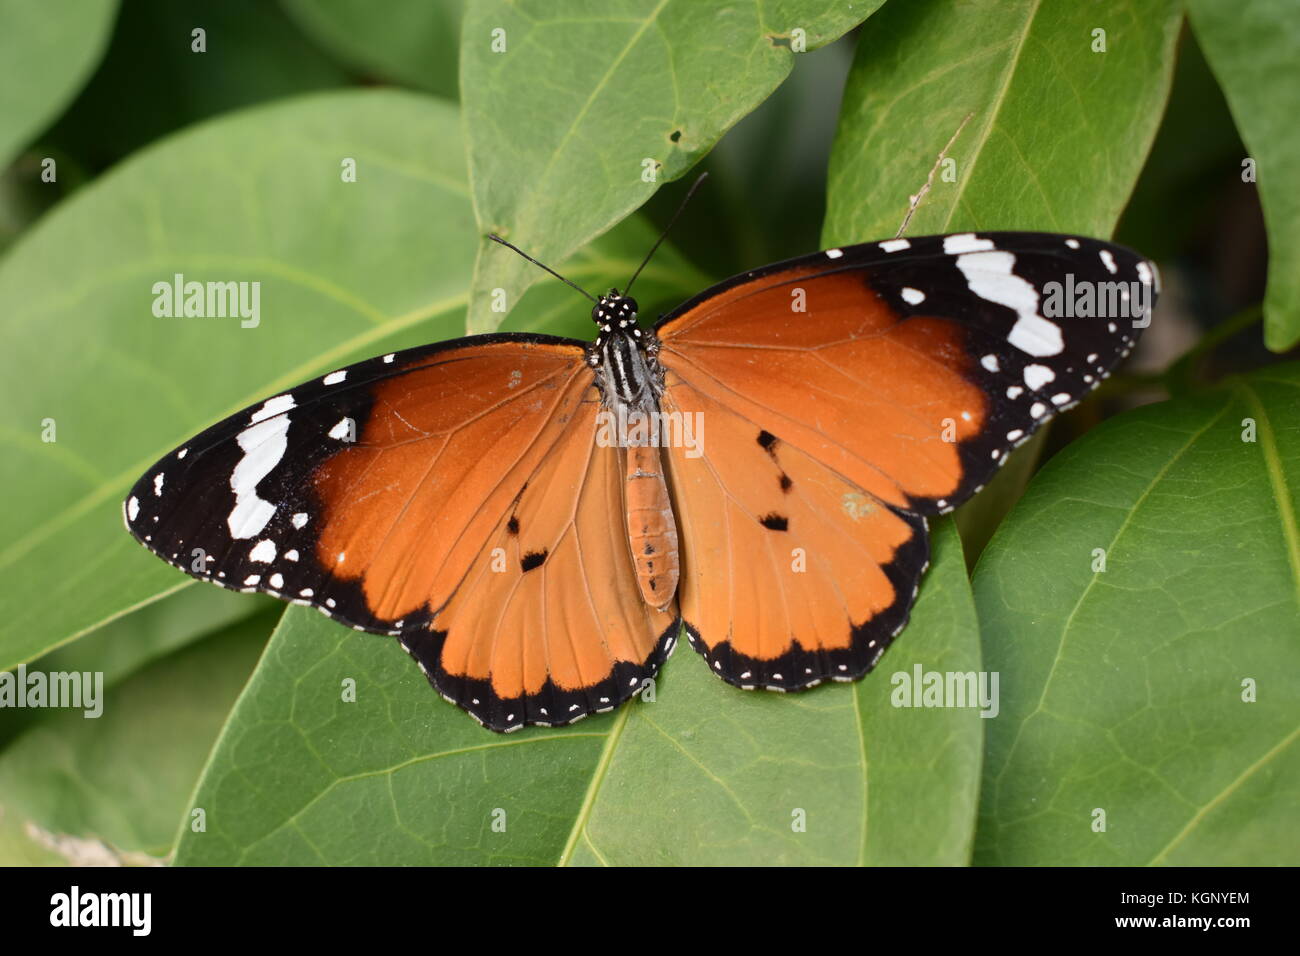 A Danaus chrysippus butterfly on green leaves. Stock Photo